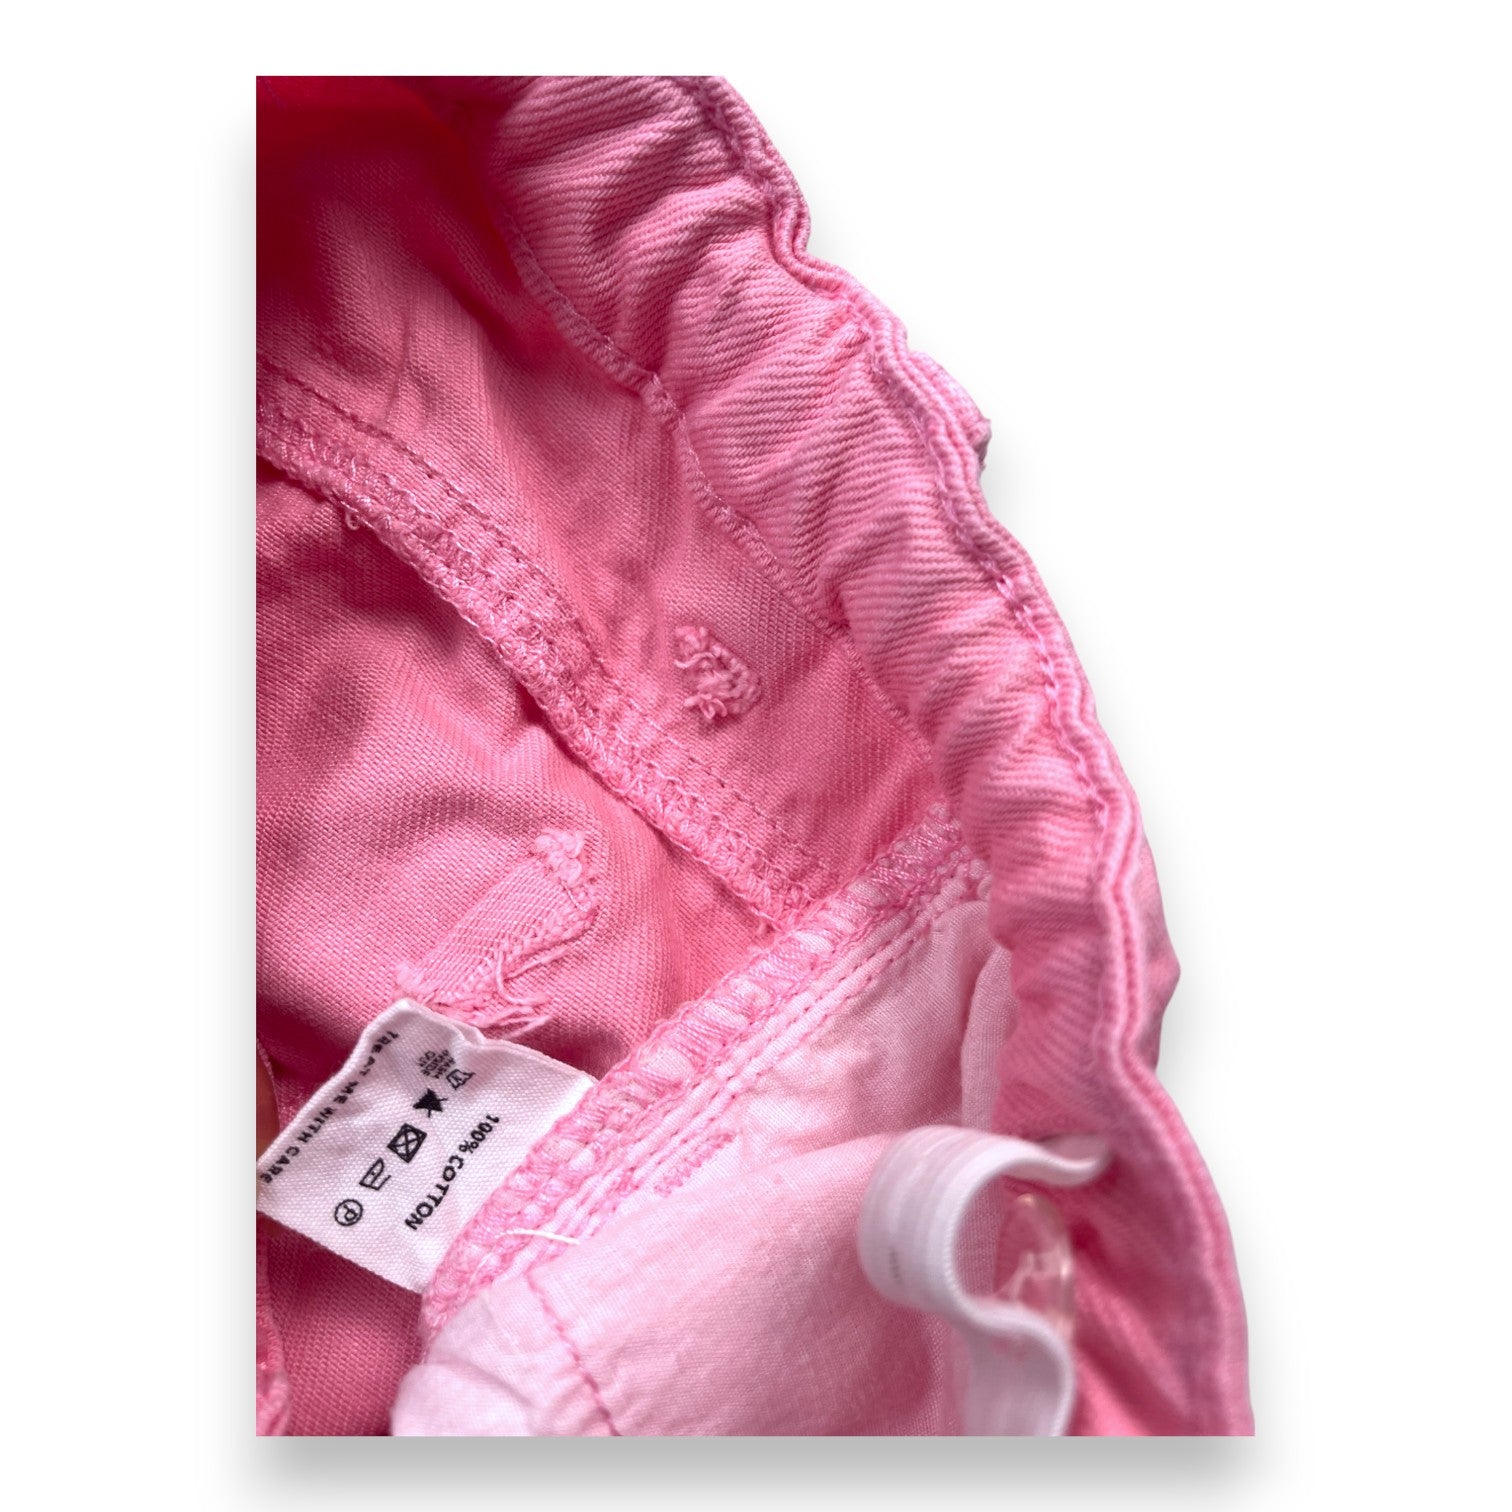 MAED FOR MINI - Jean droit rose - 8 ans